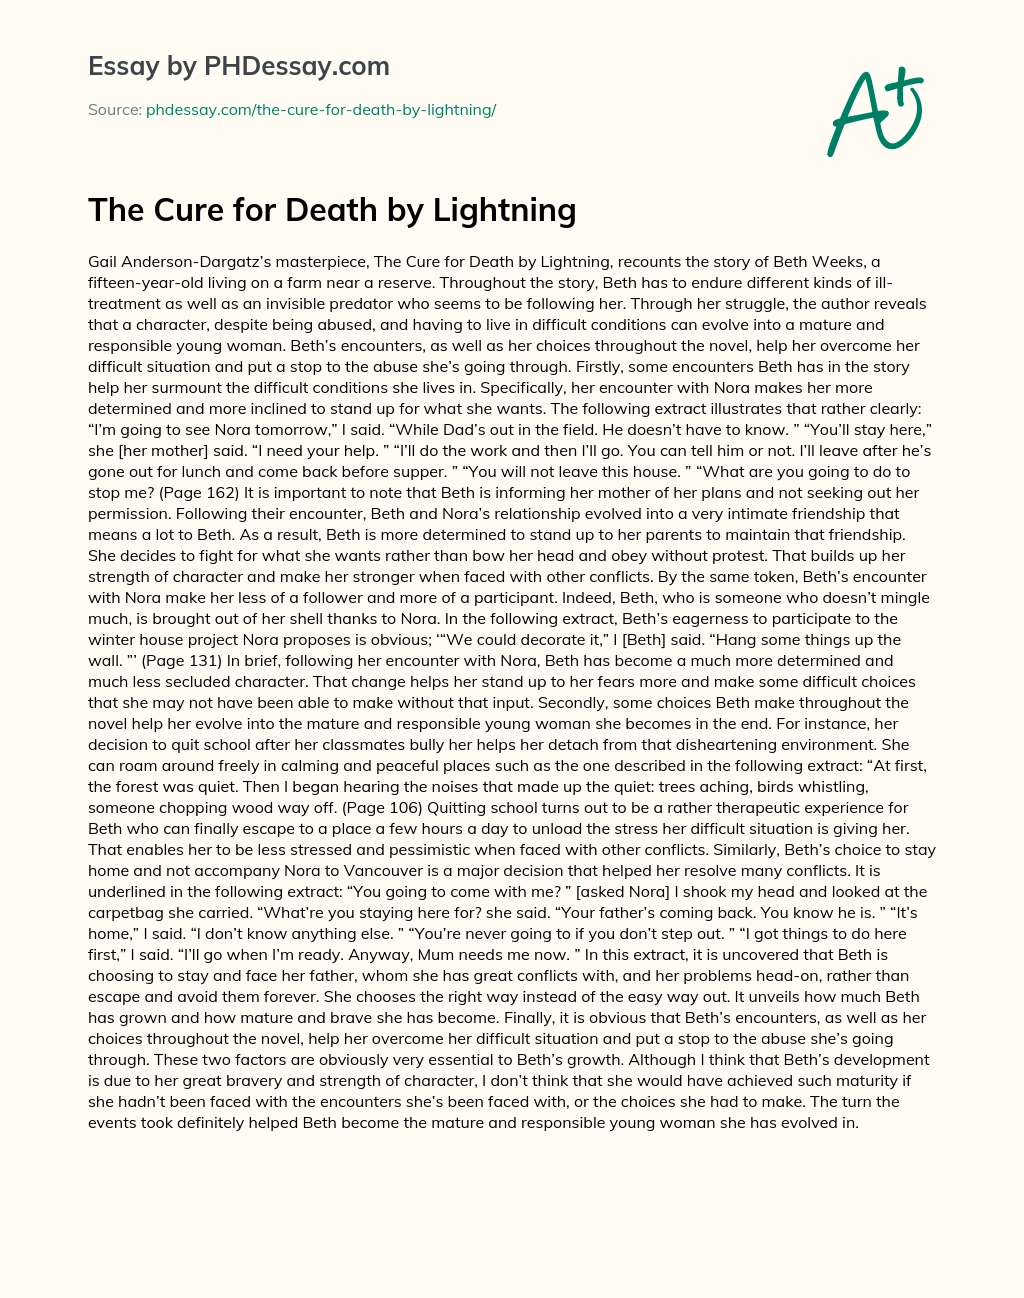 The Cure for Death by Lightning essay